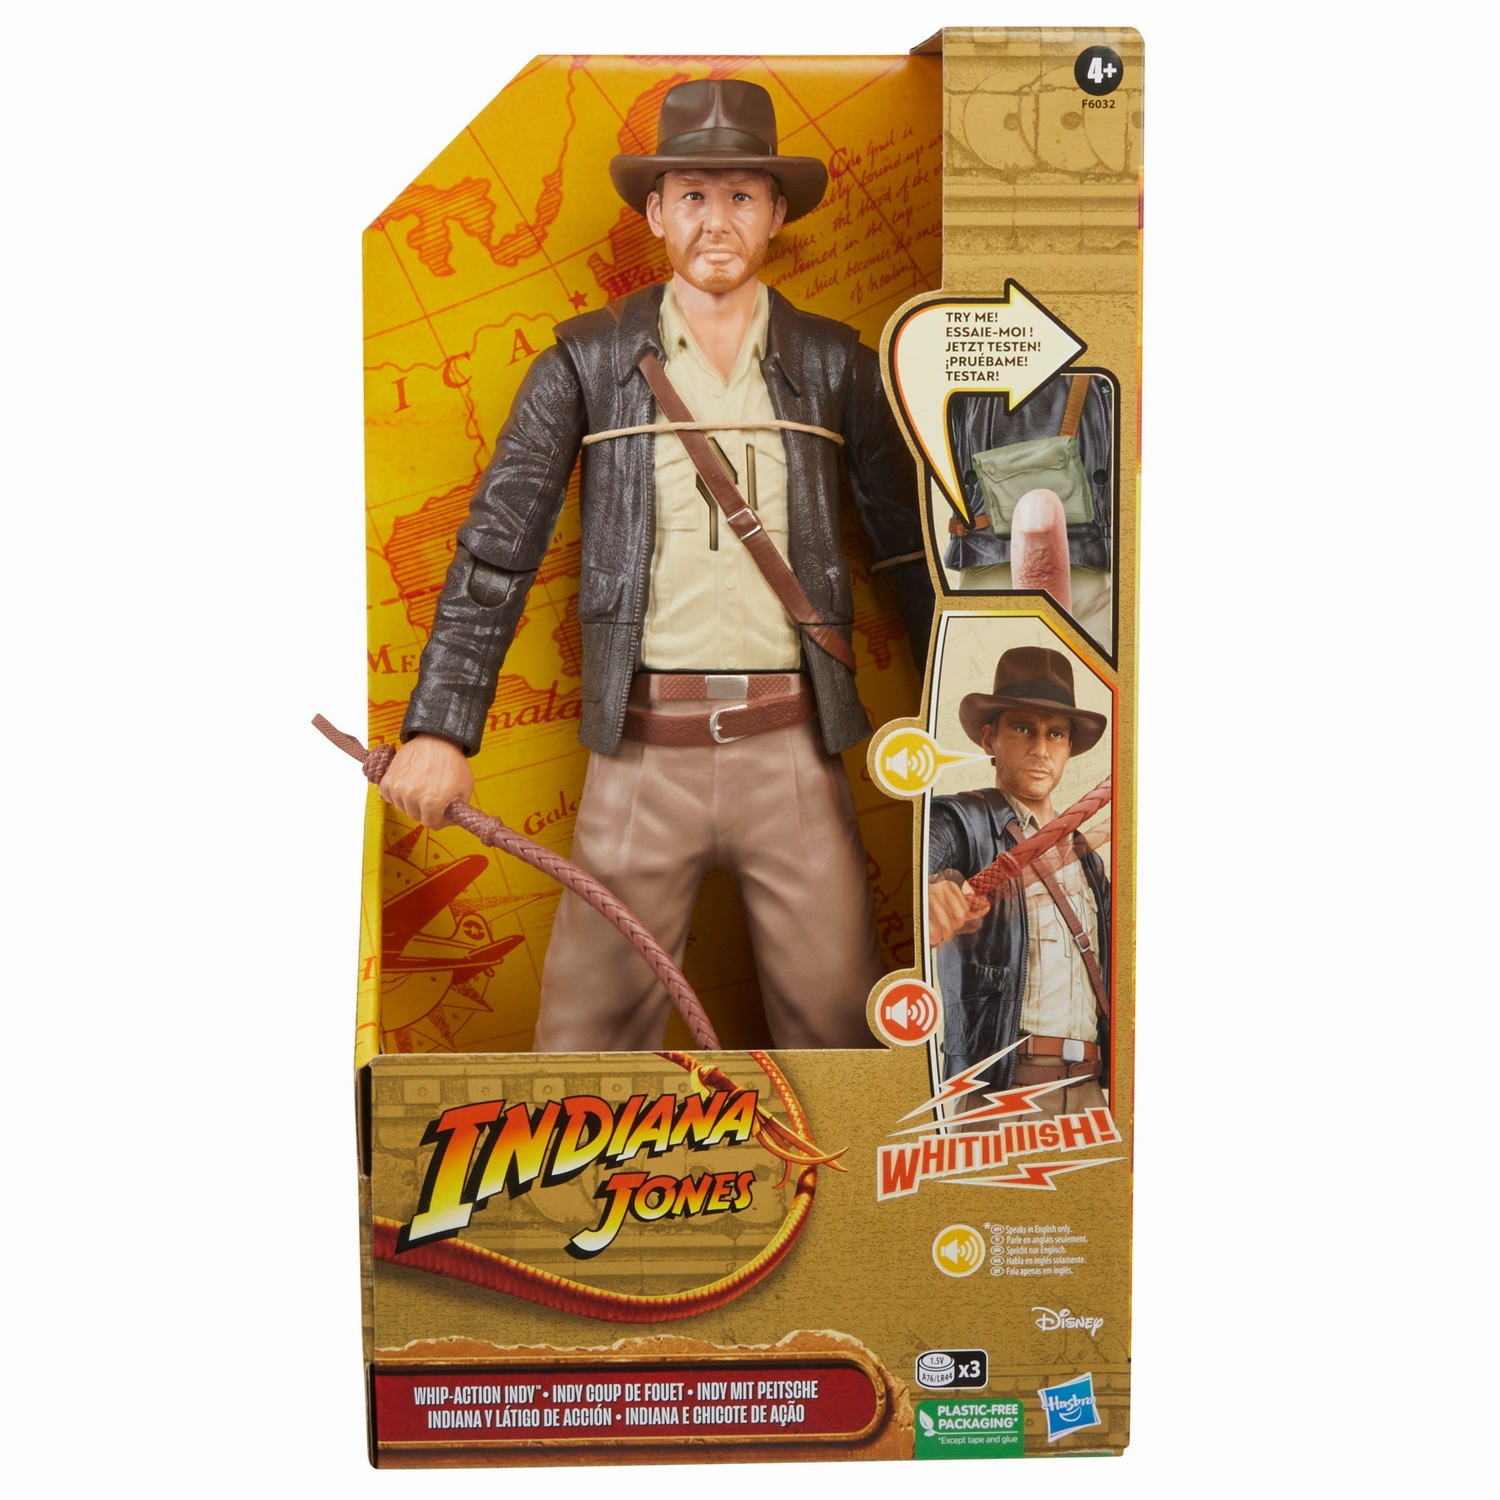 INDIANA JONES WHIP-ACTION INDY - Package 2.jpg